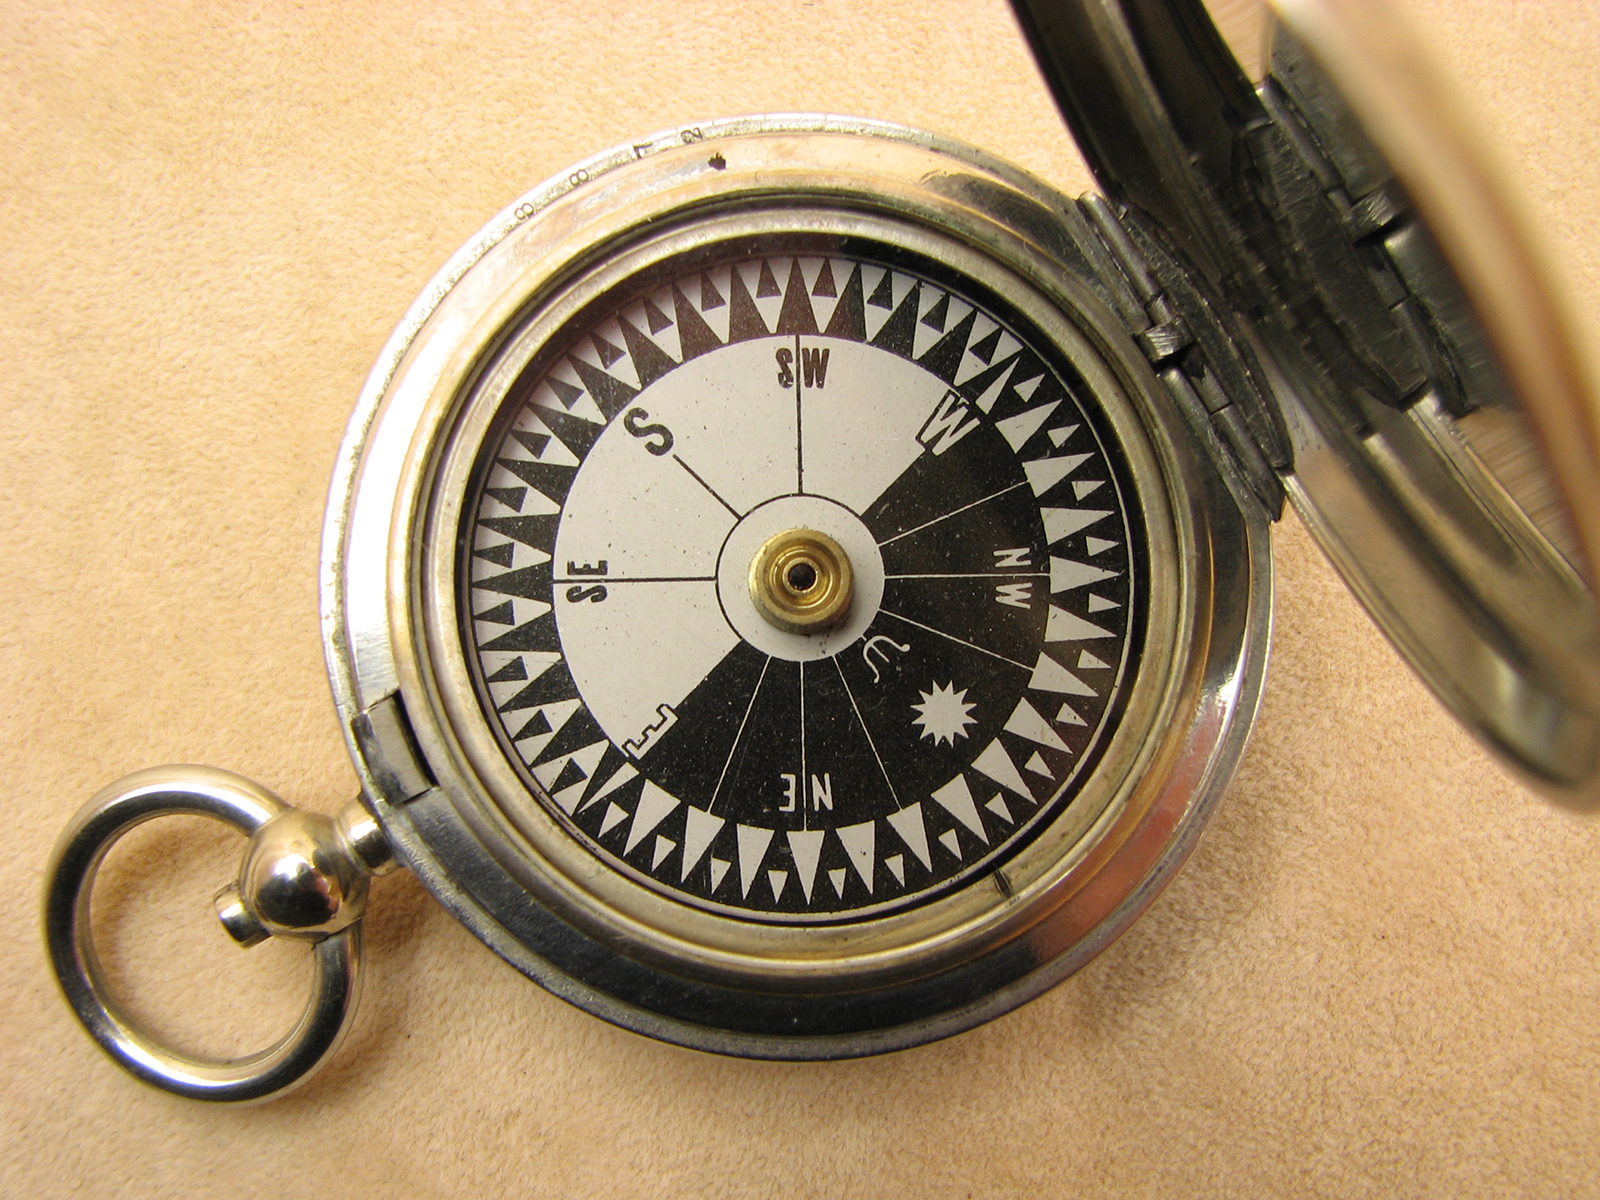 WW1 Dennison MK V pocket compass with Singers Patent style dial - dated 1916